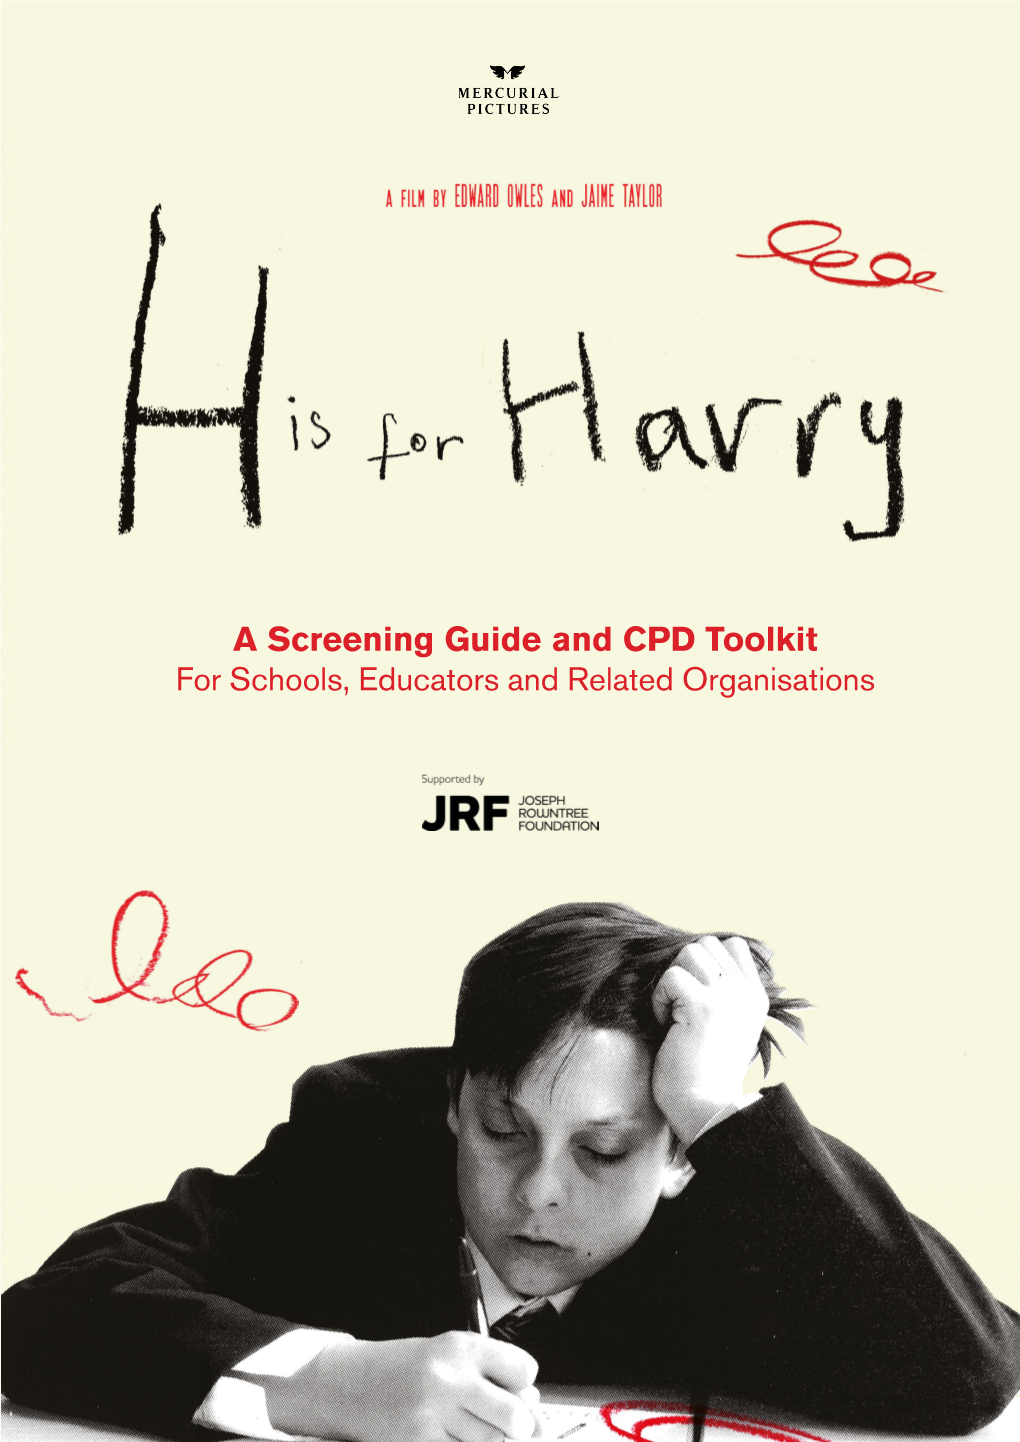 A Screening Guide and CPD Toolkit for Schools, Educators and Related Organisations